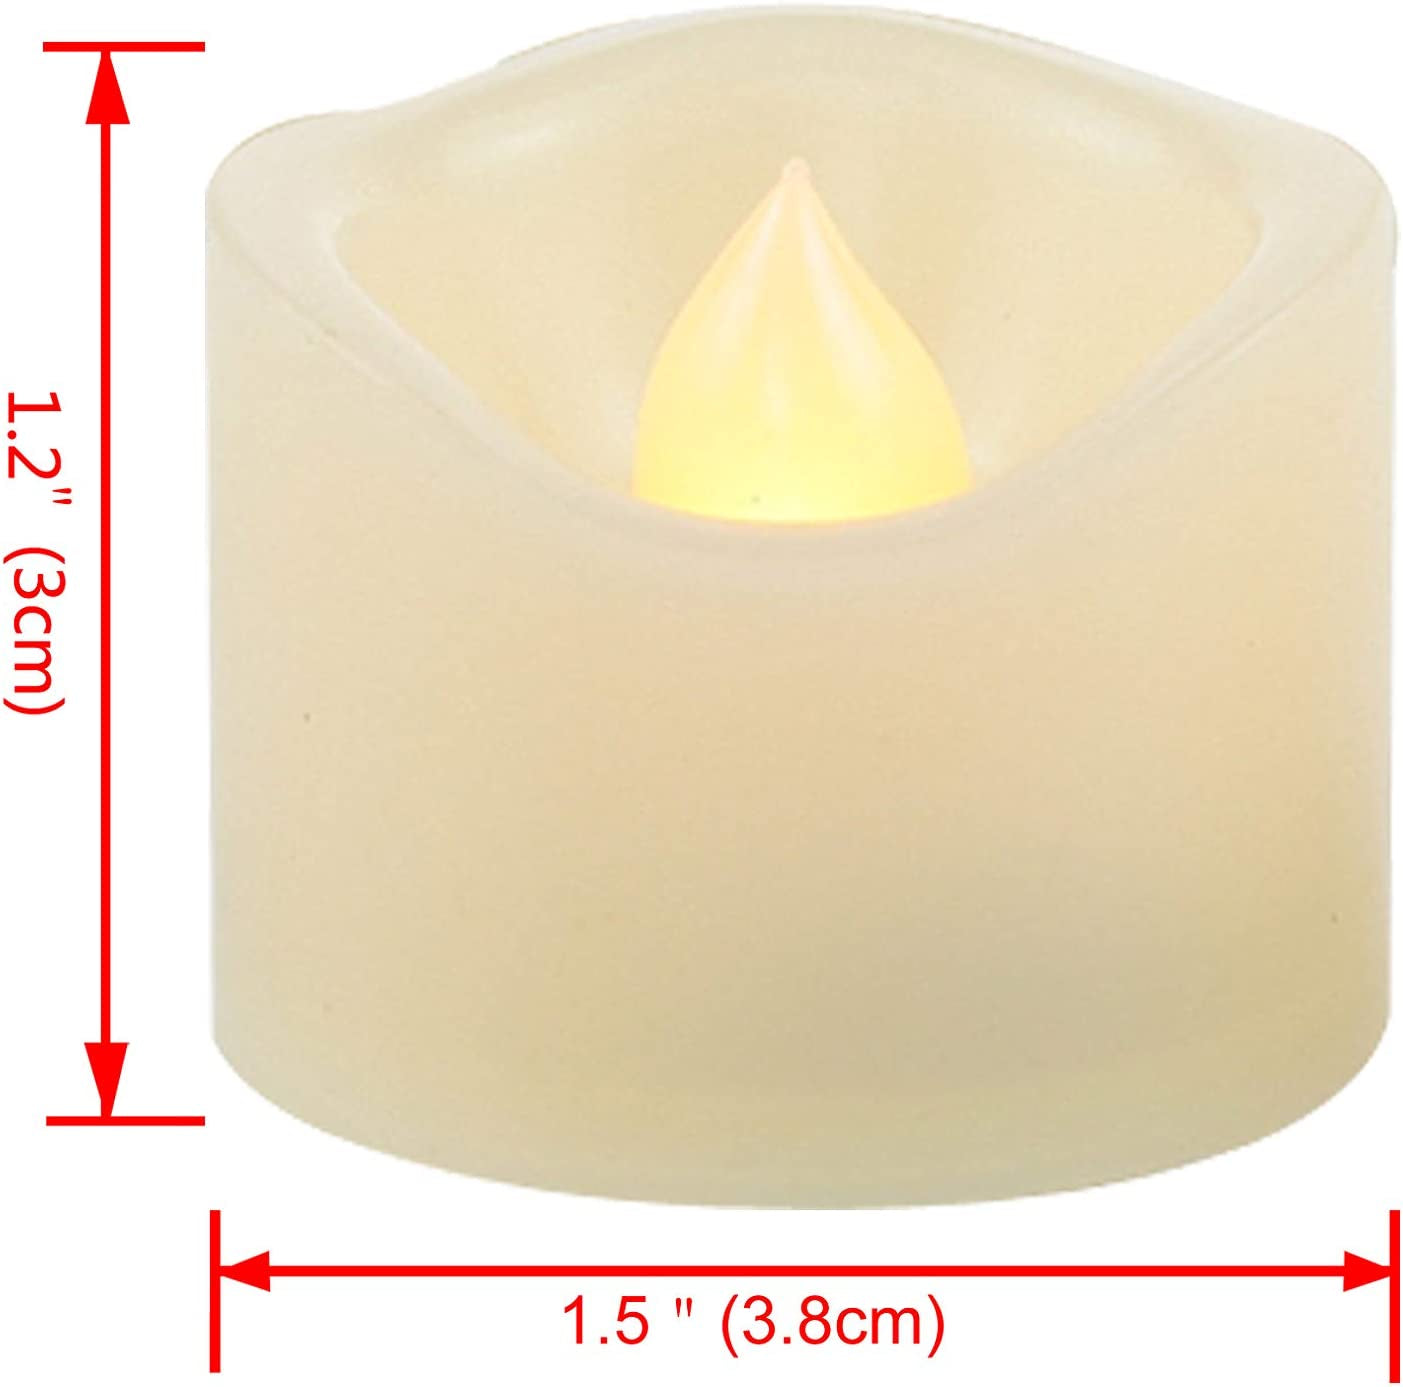 Battery Operated Flameless Tea Lights Realistic Flickering Long Lasting LED Votive Tealight Candles for Halloween Thanksgiving Christmas Wedding Decorations Battery Included 24 Pack